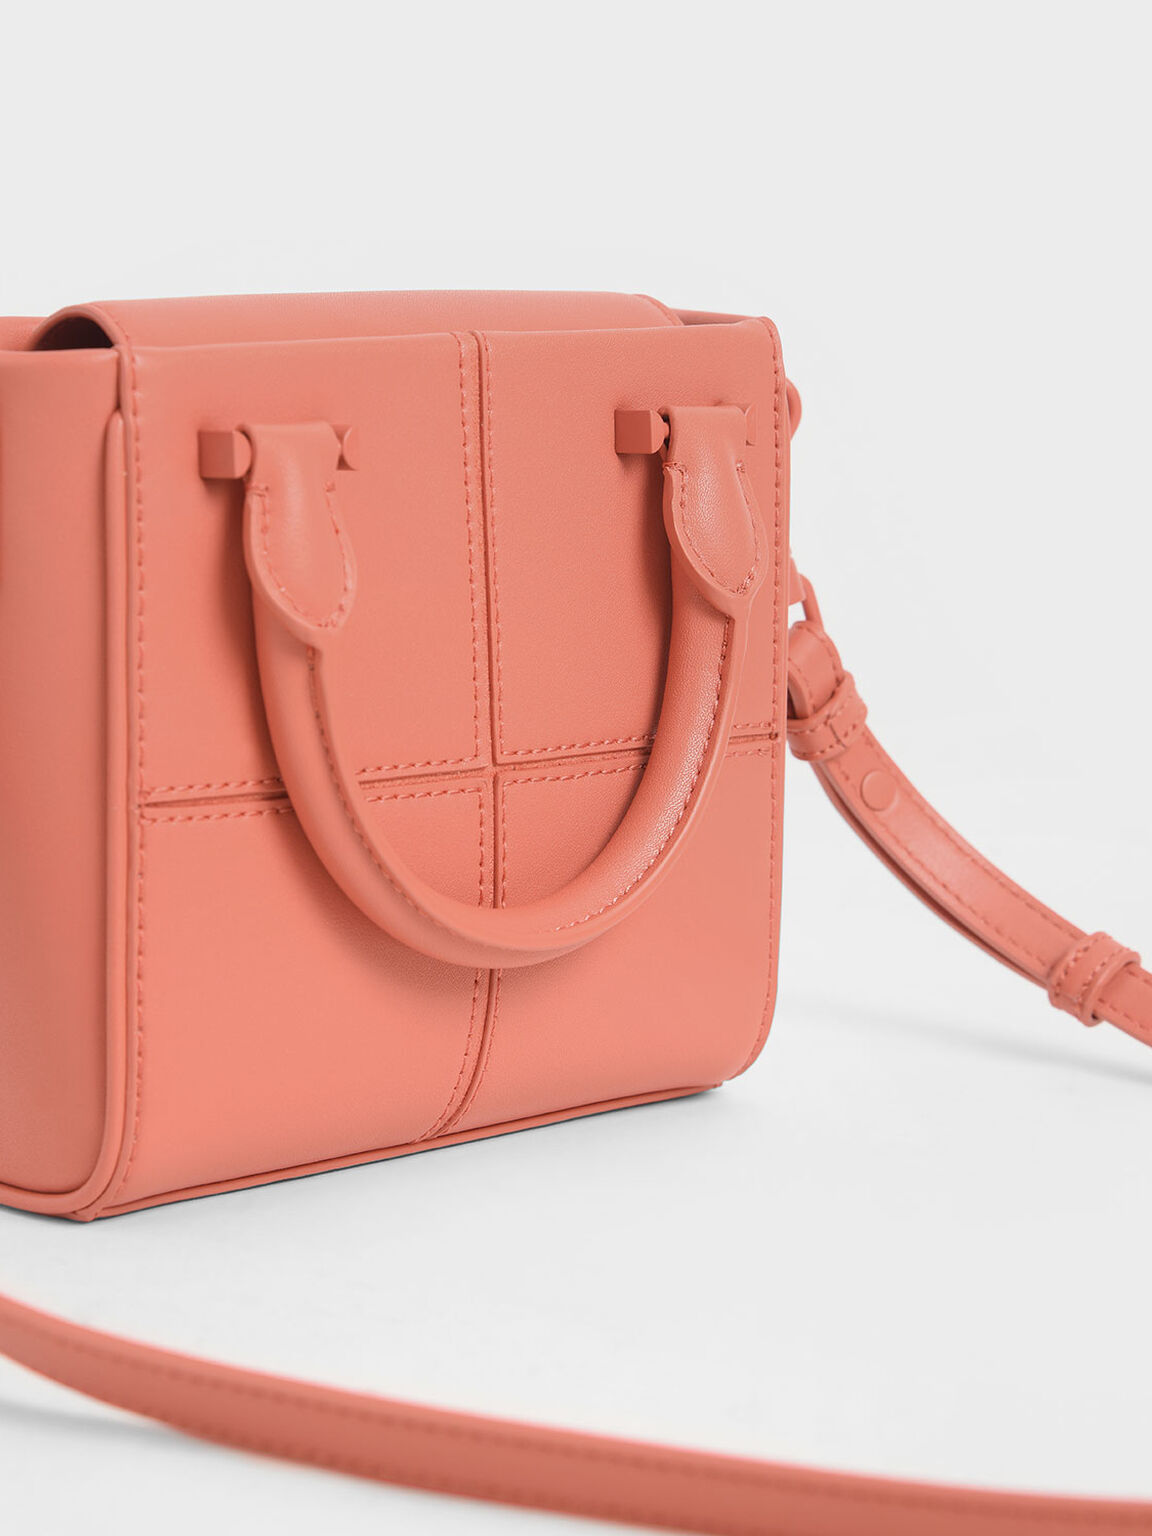 TÚI XÁCH NỮ CHARLES & KEITH TEXTURED PANELLED TOP HANDLE BAG 43